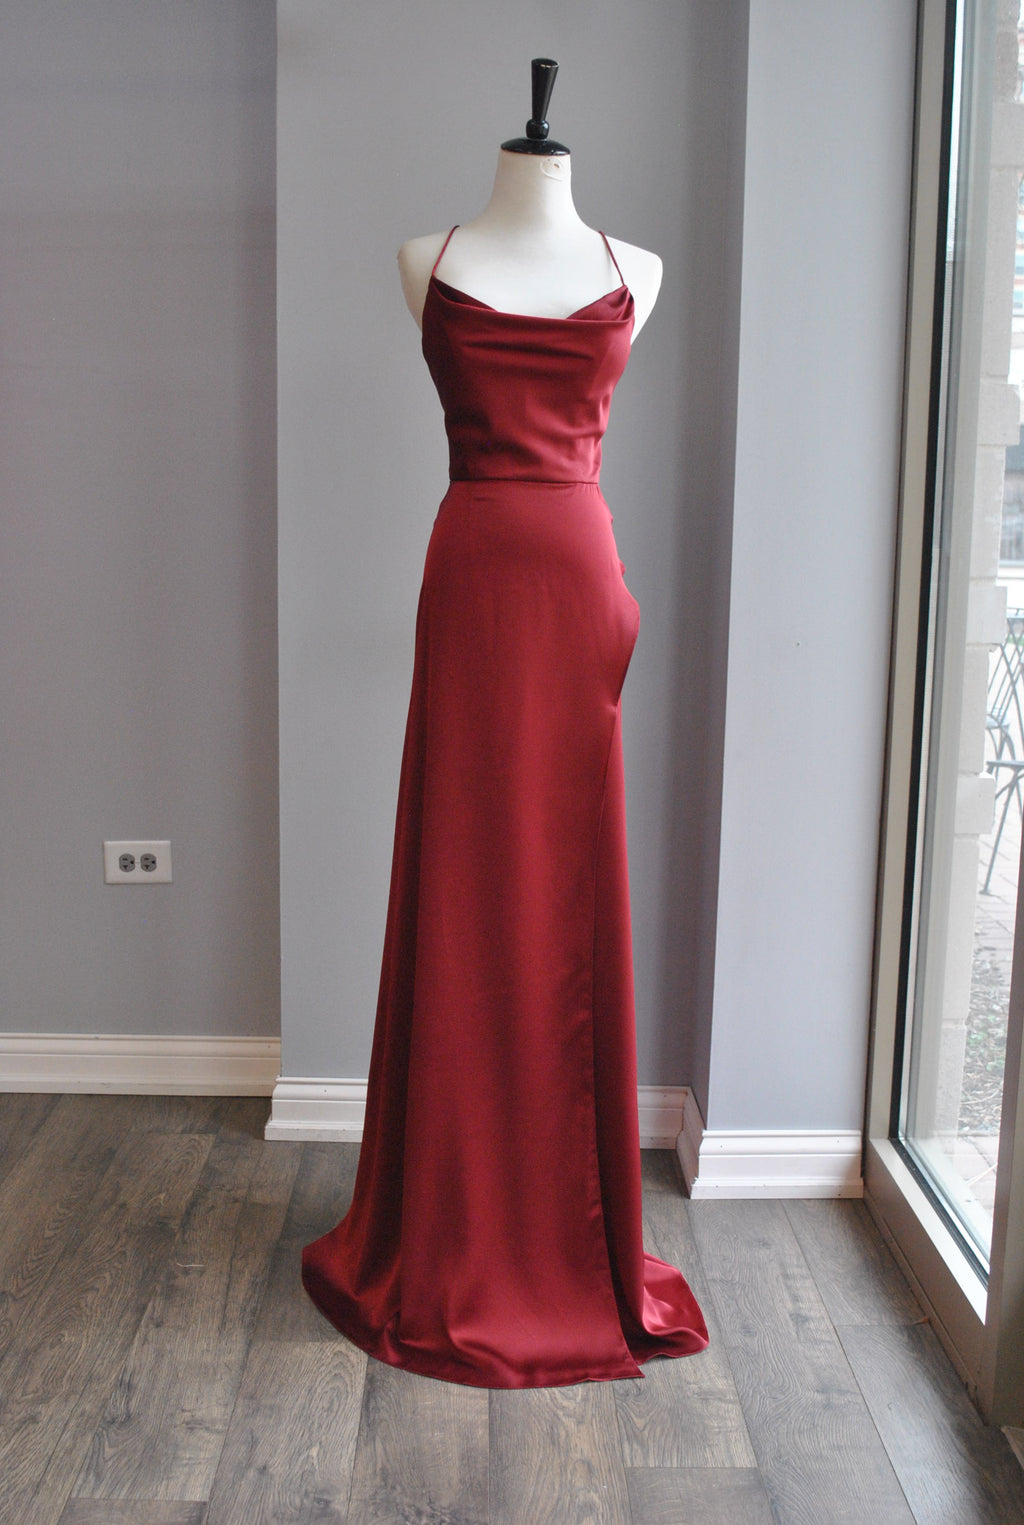 WINE COLOR SILKY LONG EVENING GOWN WITH SIDE SLIP